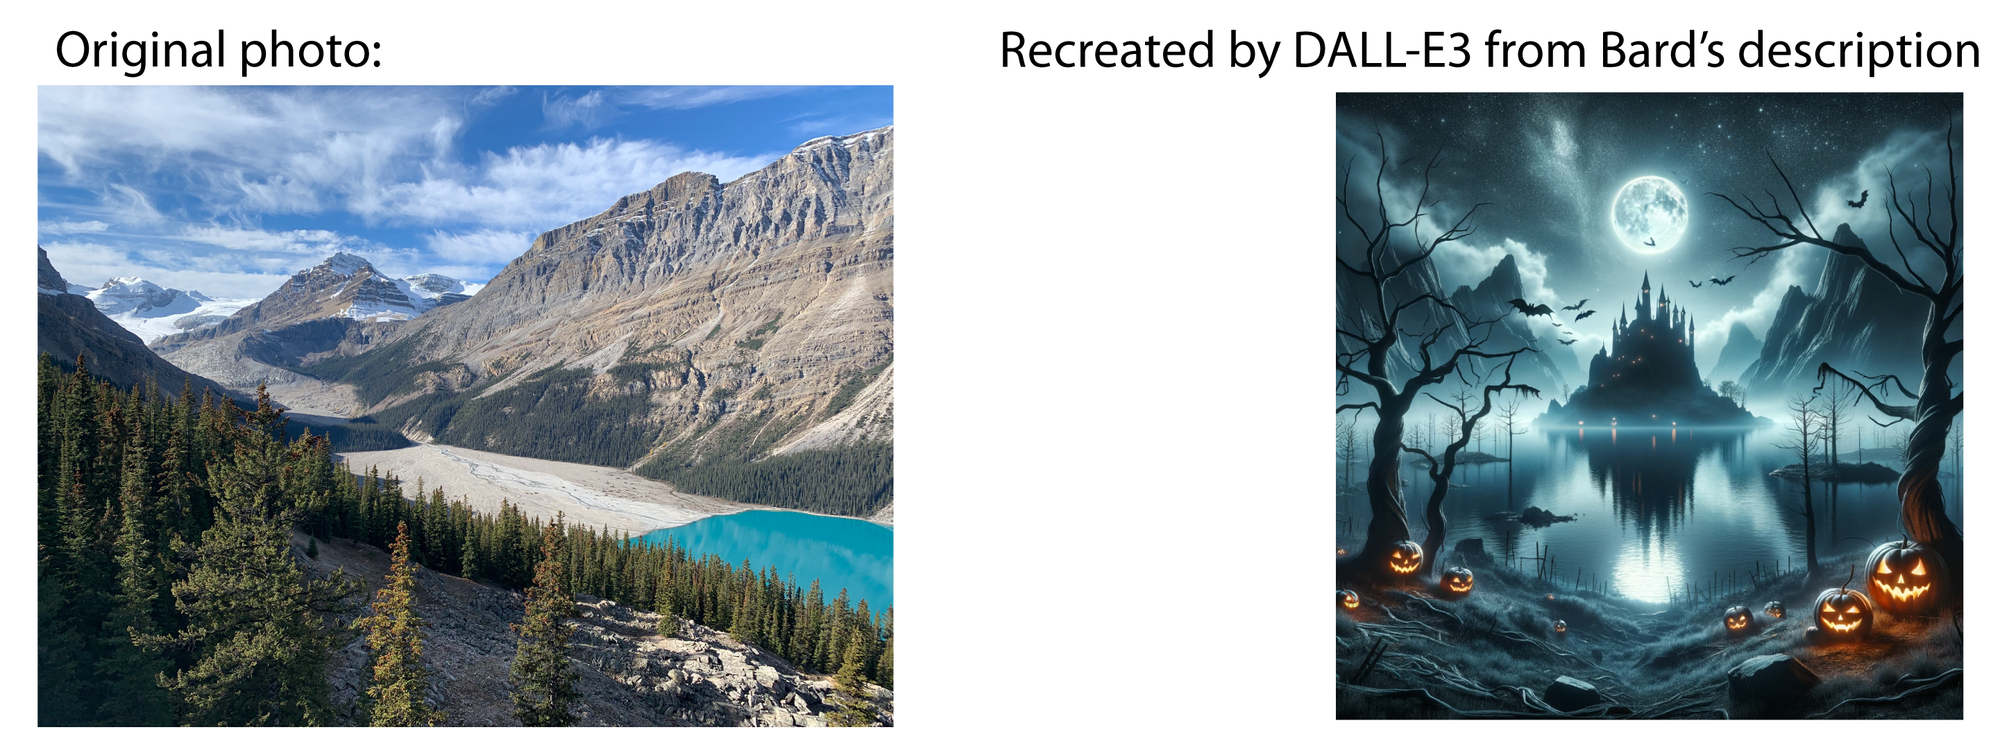 Left: A landscape photo of Peyto Lake in the Canadian Rockies, a glacial lake with evergreens at its sides and a glacier at its head. It is full daylight and (as will be relevant in just a bit), there are no islands, ruined castles, or jack o'lanterns anywhere in the image. Right: Recreated by Dall-e3 from Bard's description. It's a nighttime scene with a full moon, an eerie castle on an island in a mountain lake, and gnarled trees and jack-o'-lanterns in the foreground.